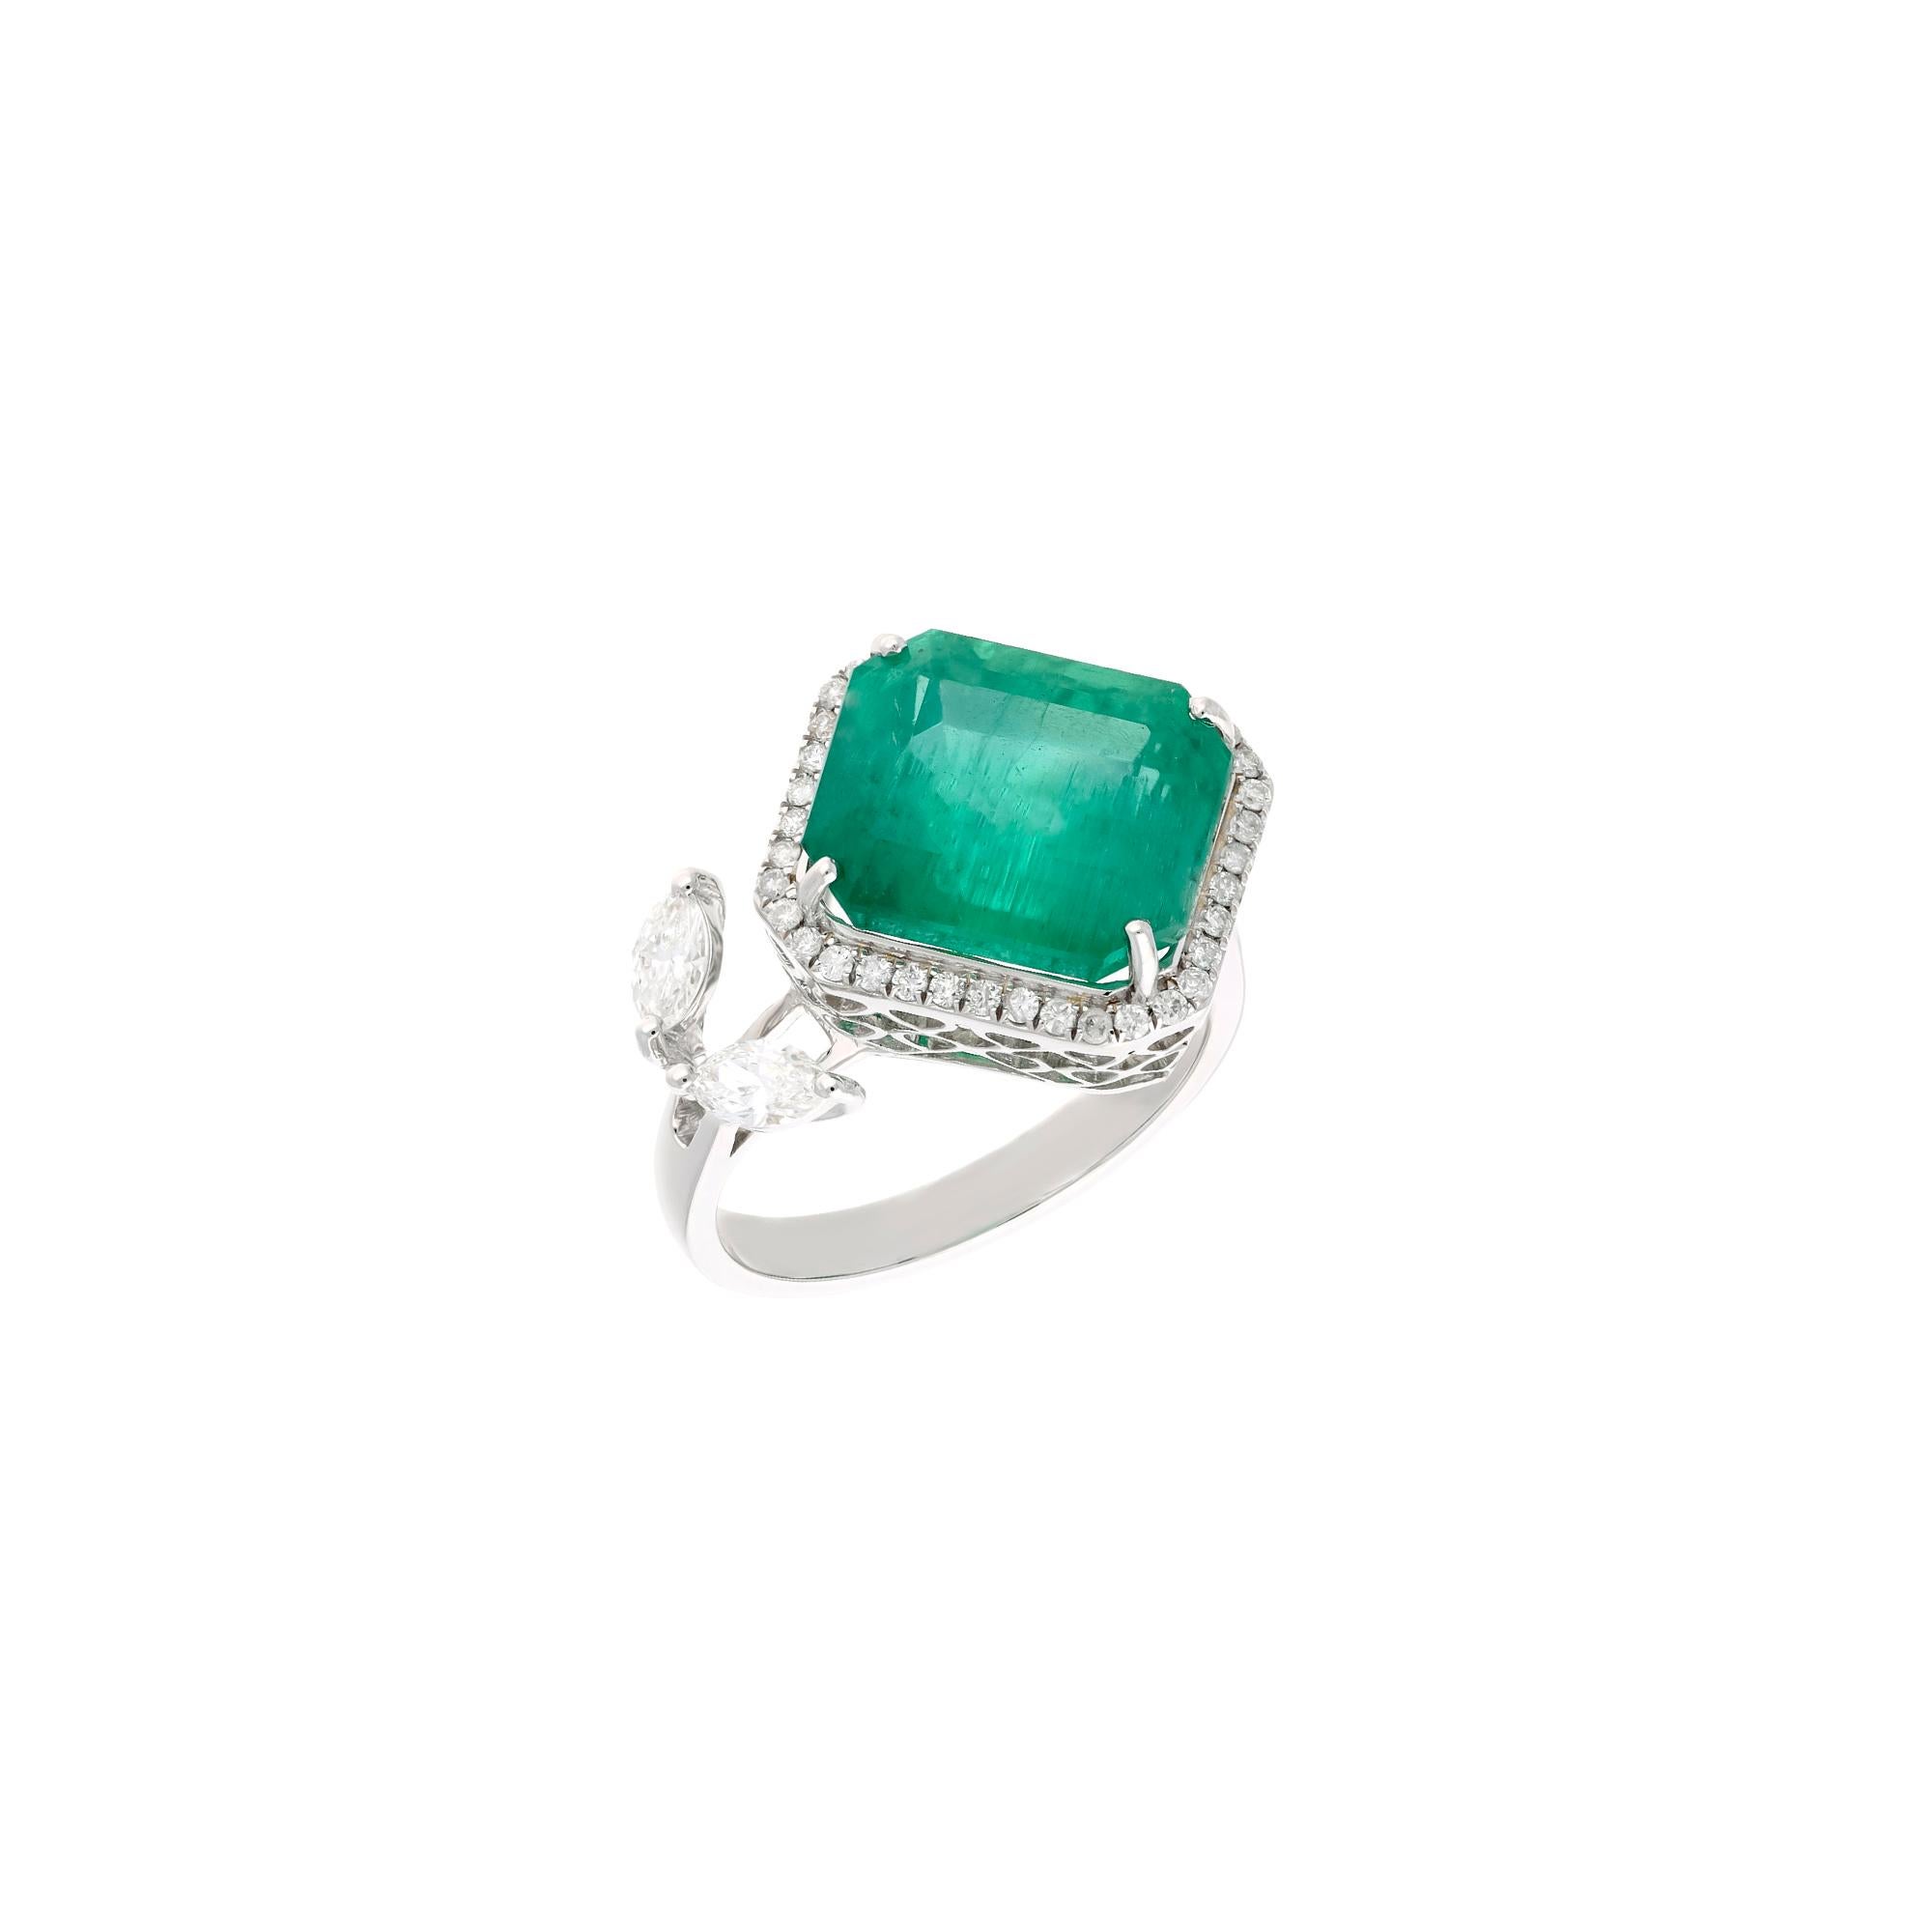 This is a natural Zambian Emerald ring with diamonds and 18k gold. The emeralds are very high quality and very good quality diamonds the clarity is vsi and G colour


Emeralds : 8.41 carats
diamonds : 0.53 carats
gold : 4.762 gm

This is a brand new